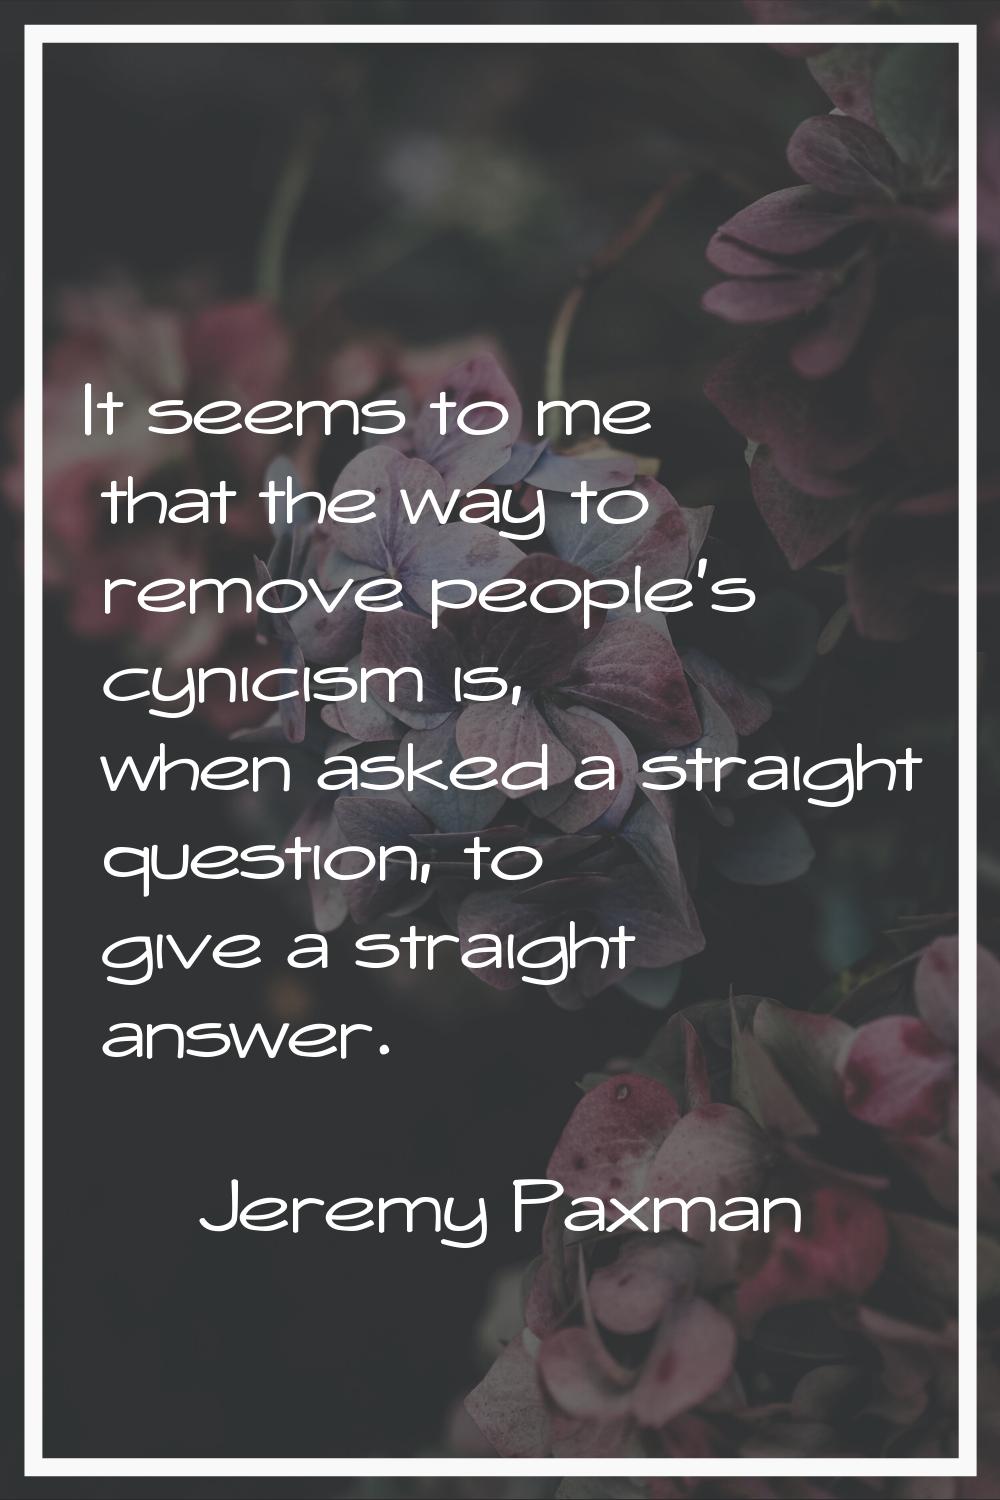 It seems to me that the way to remove people's cynicism is, when asked a straight question, to give